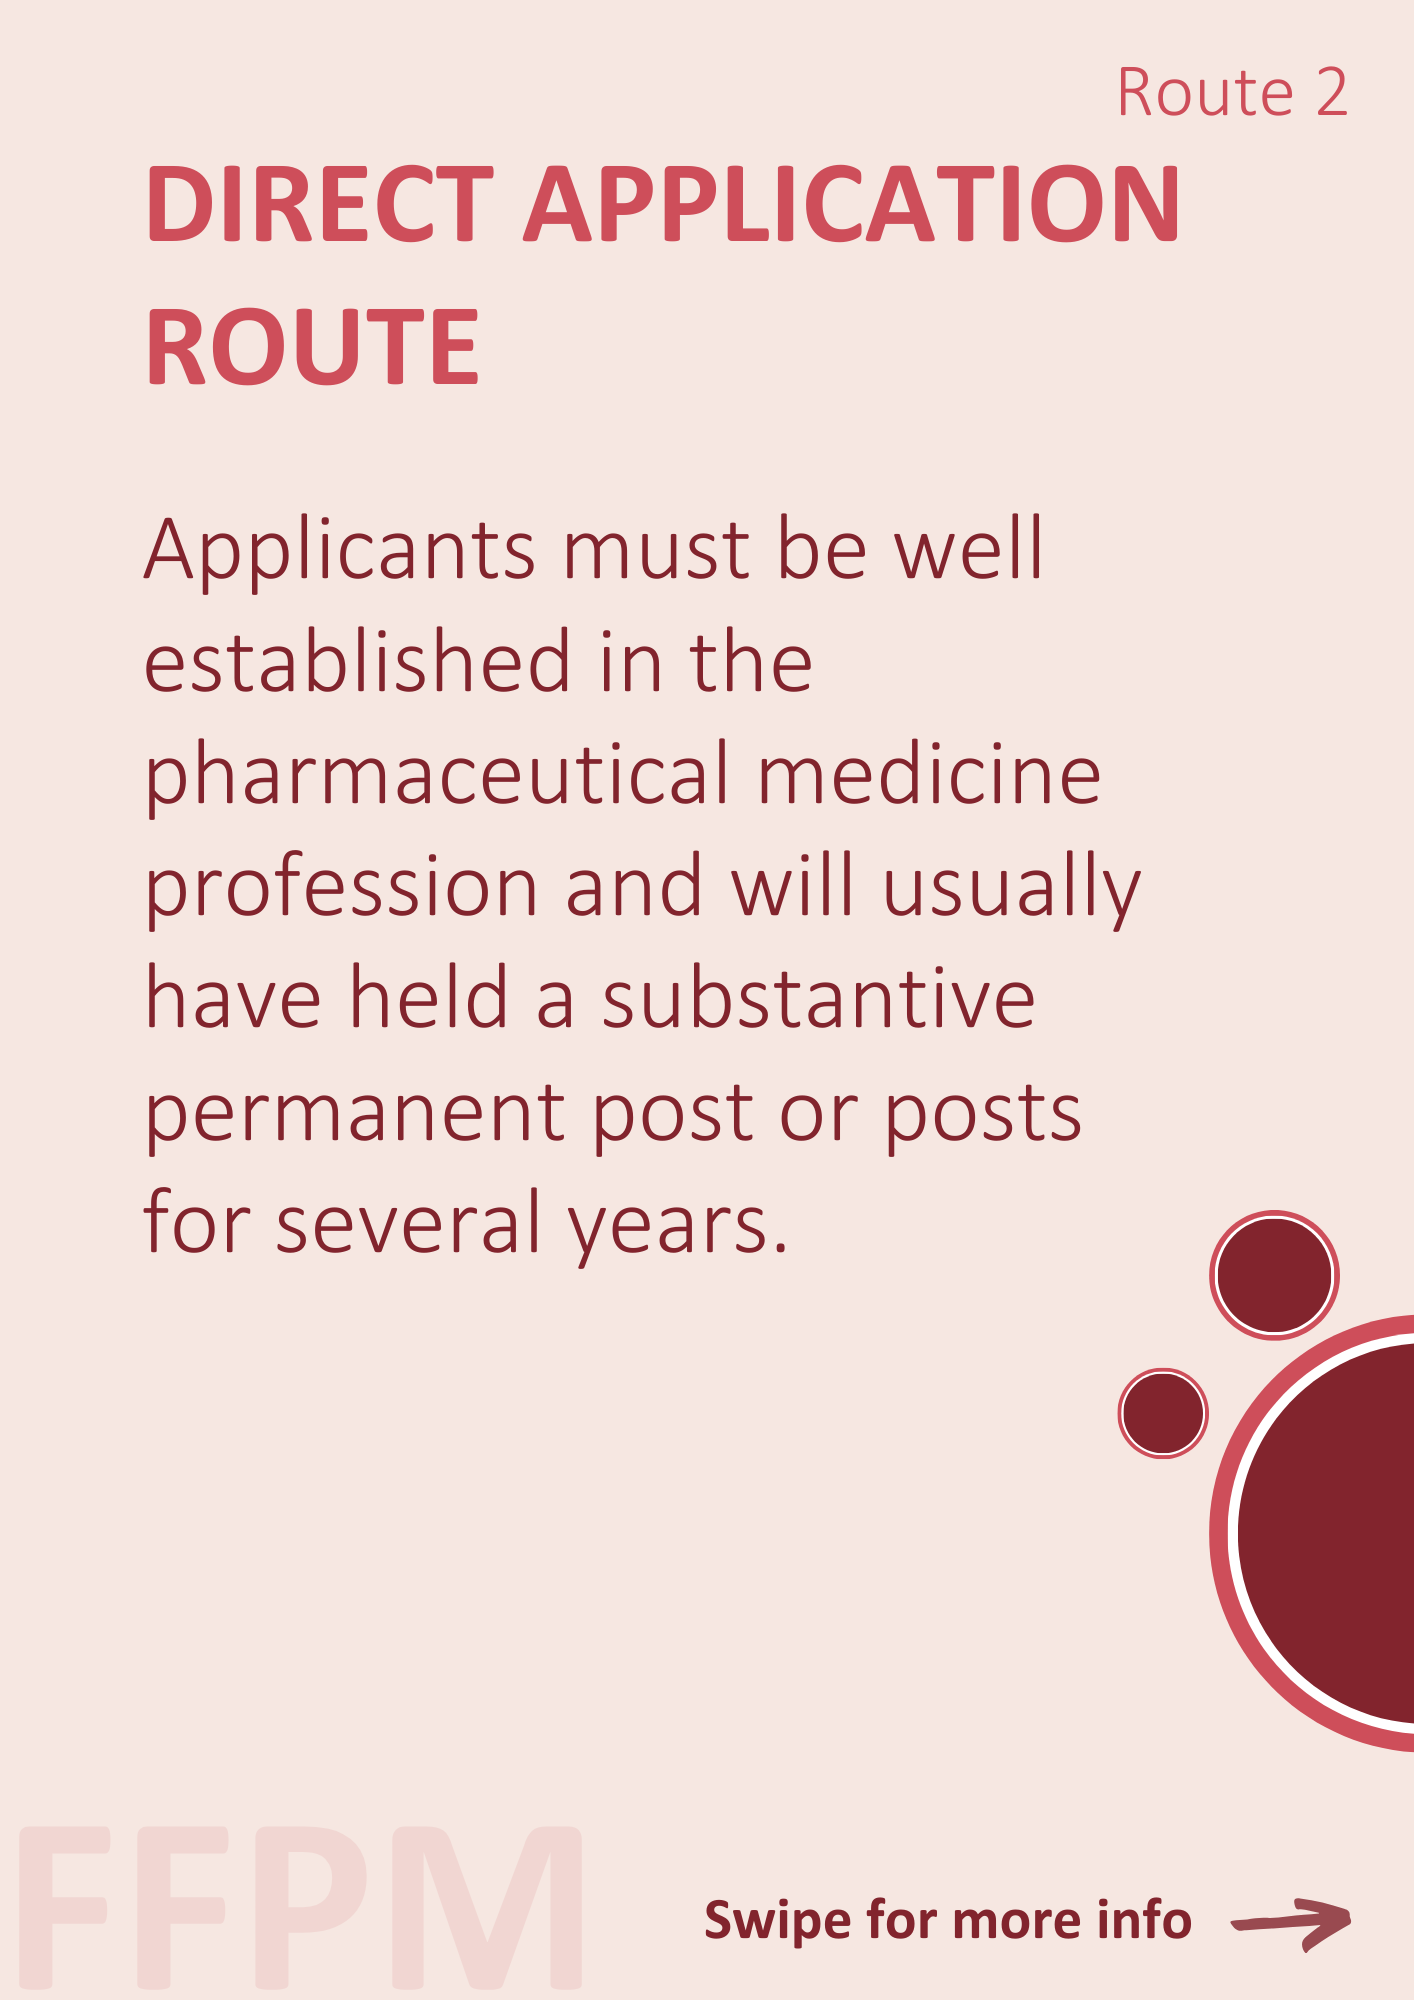 Direct Application Route. Applicants must be well established in the pharmaceutical medicine profession and will usually have held a substantive permanent post or posts for several years.